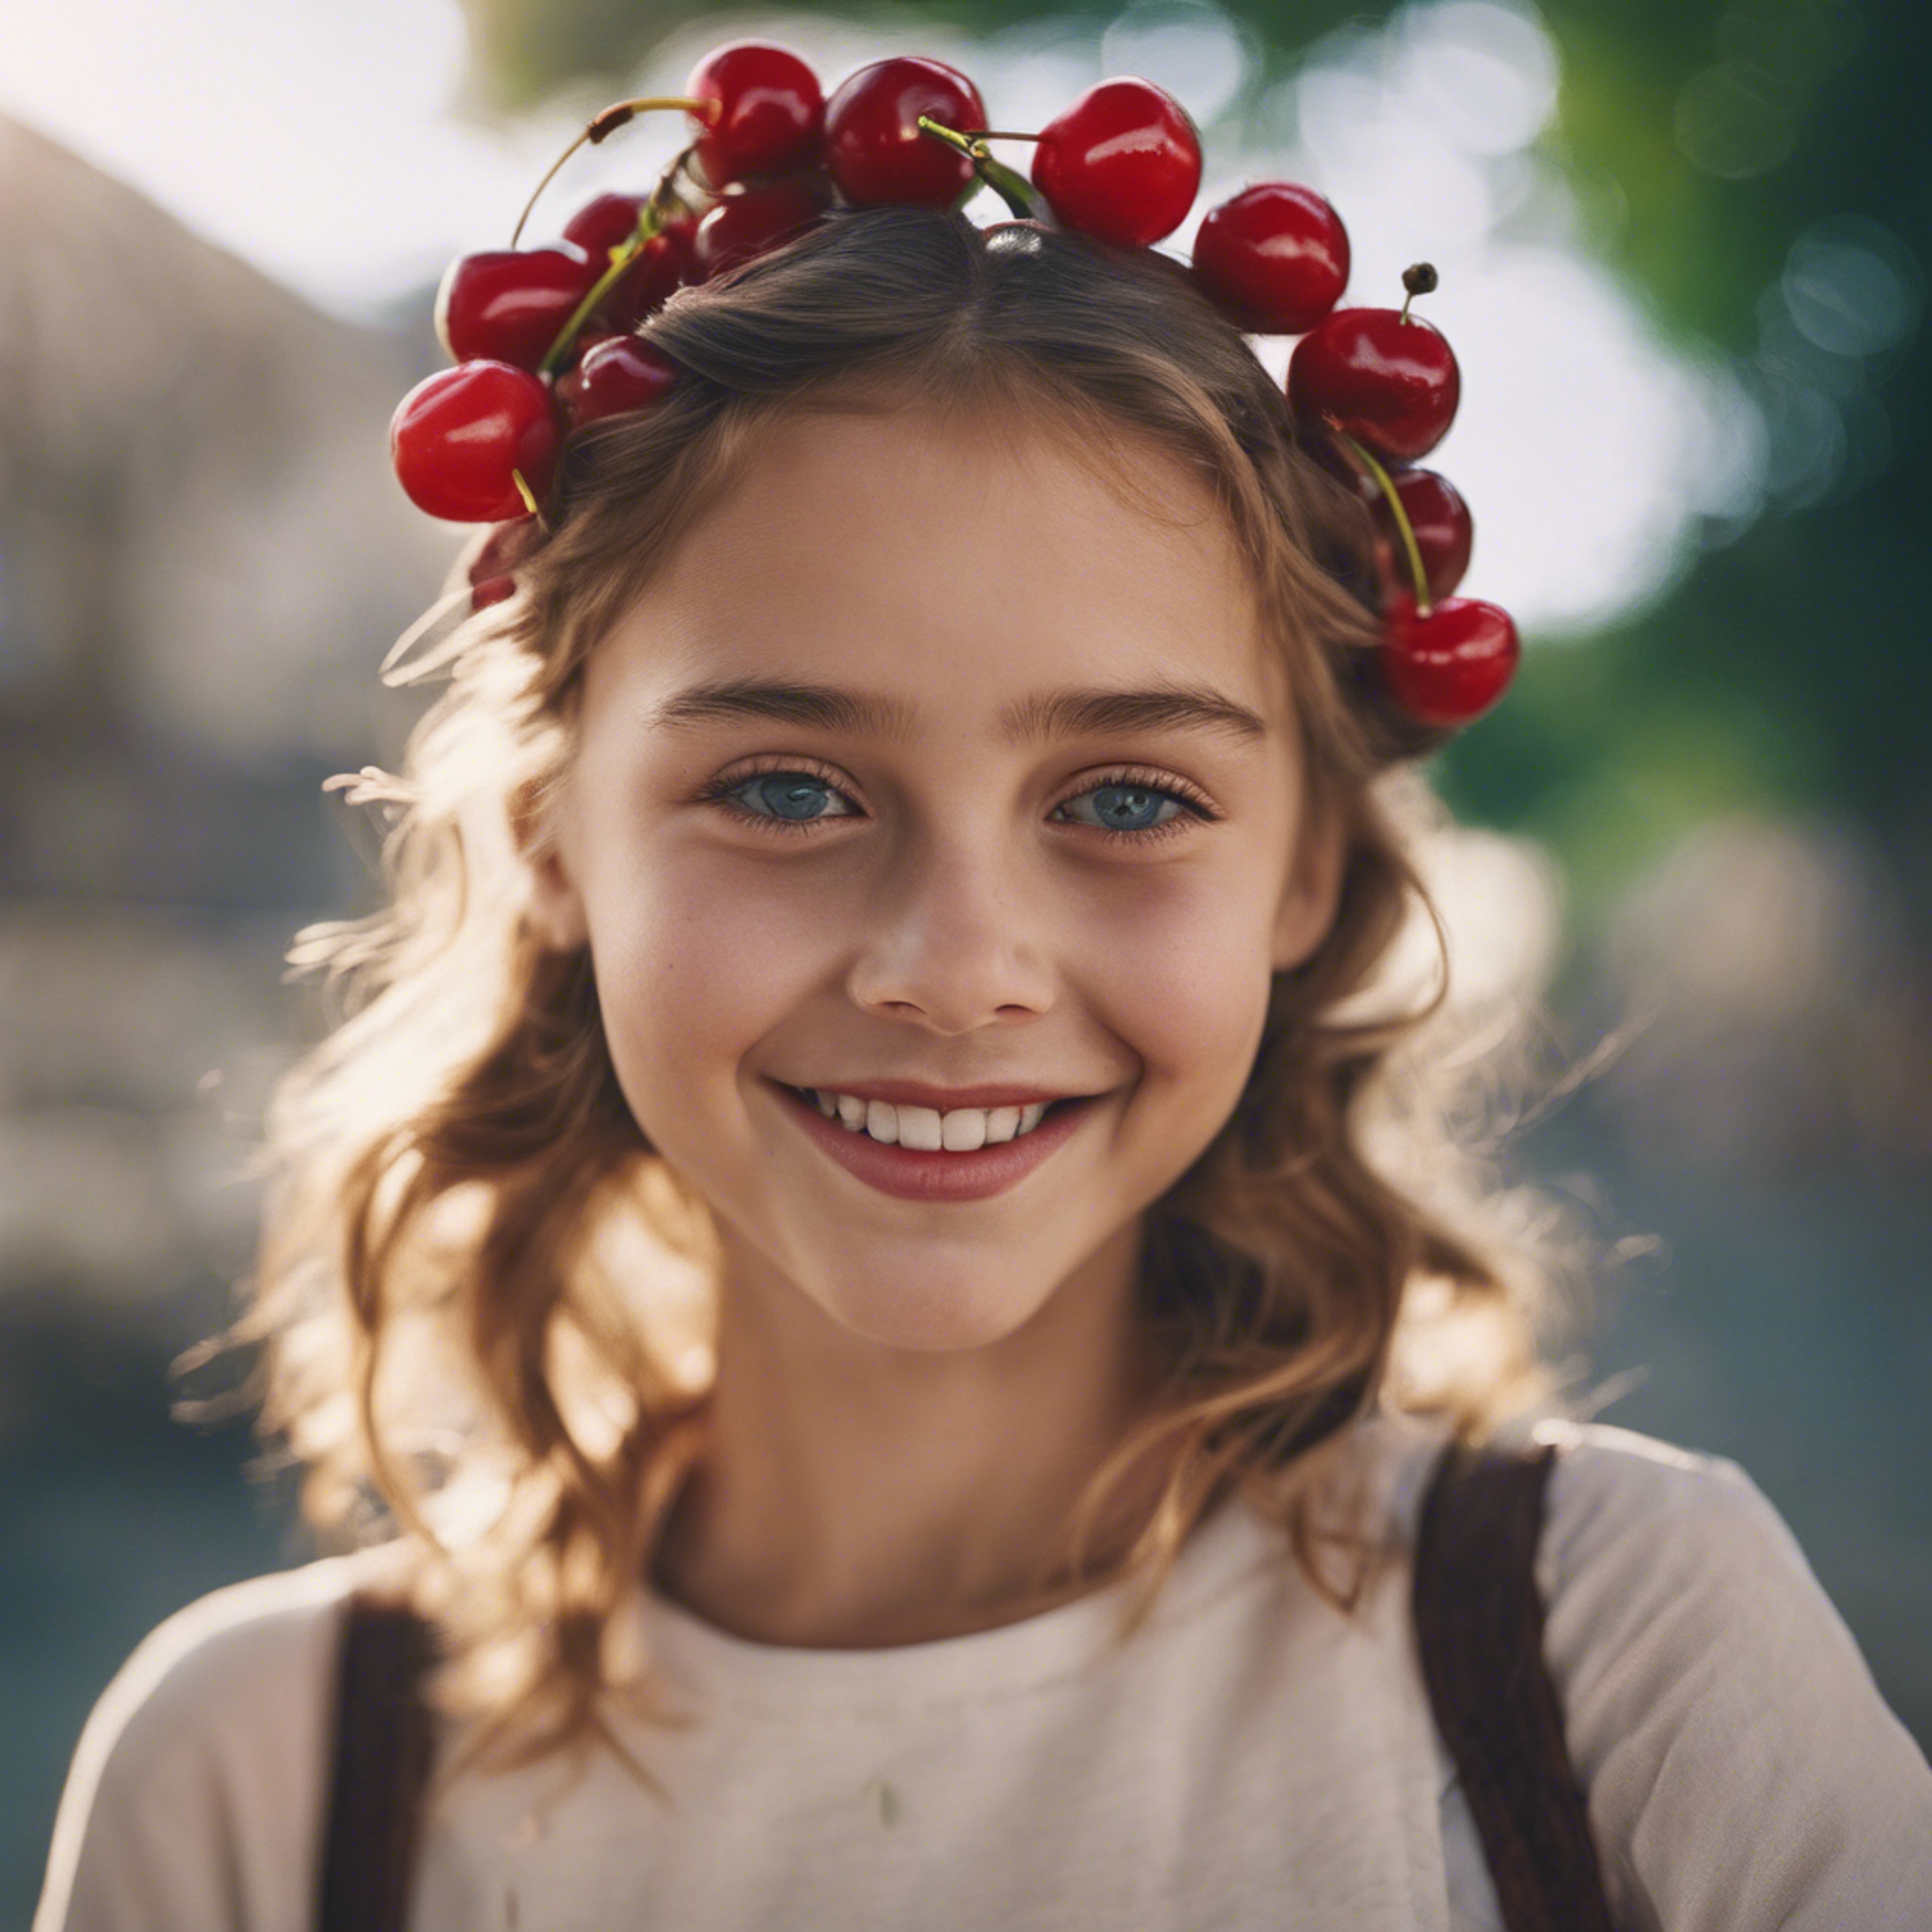 A girl with a cherry barrette in her hair, smiling at the viewer. Tapet[3ffde2b89a9346a6b02b]